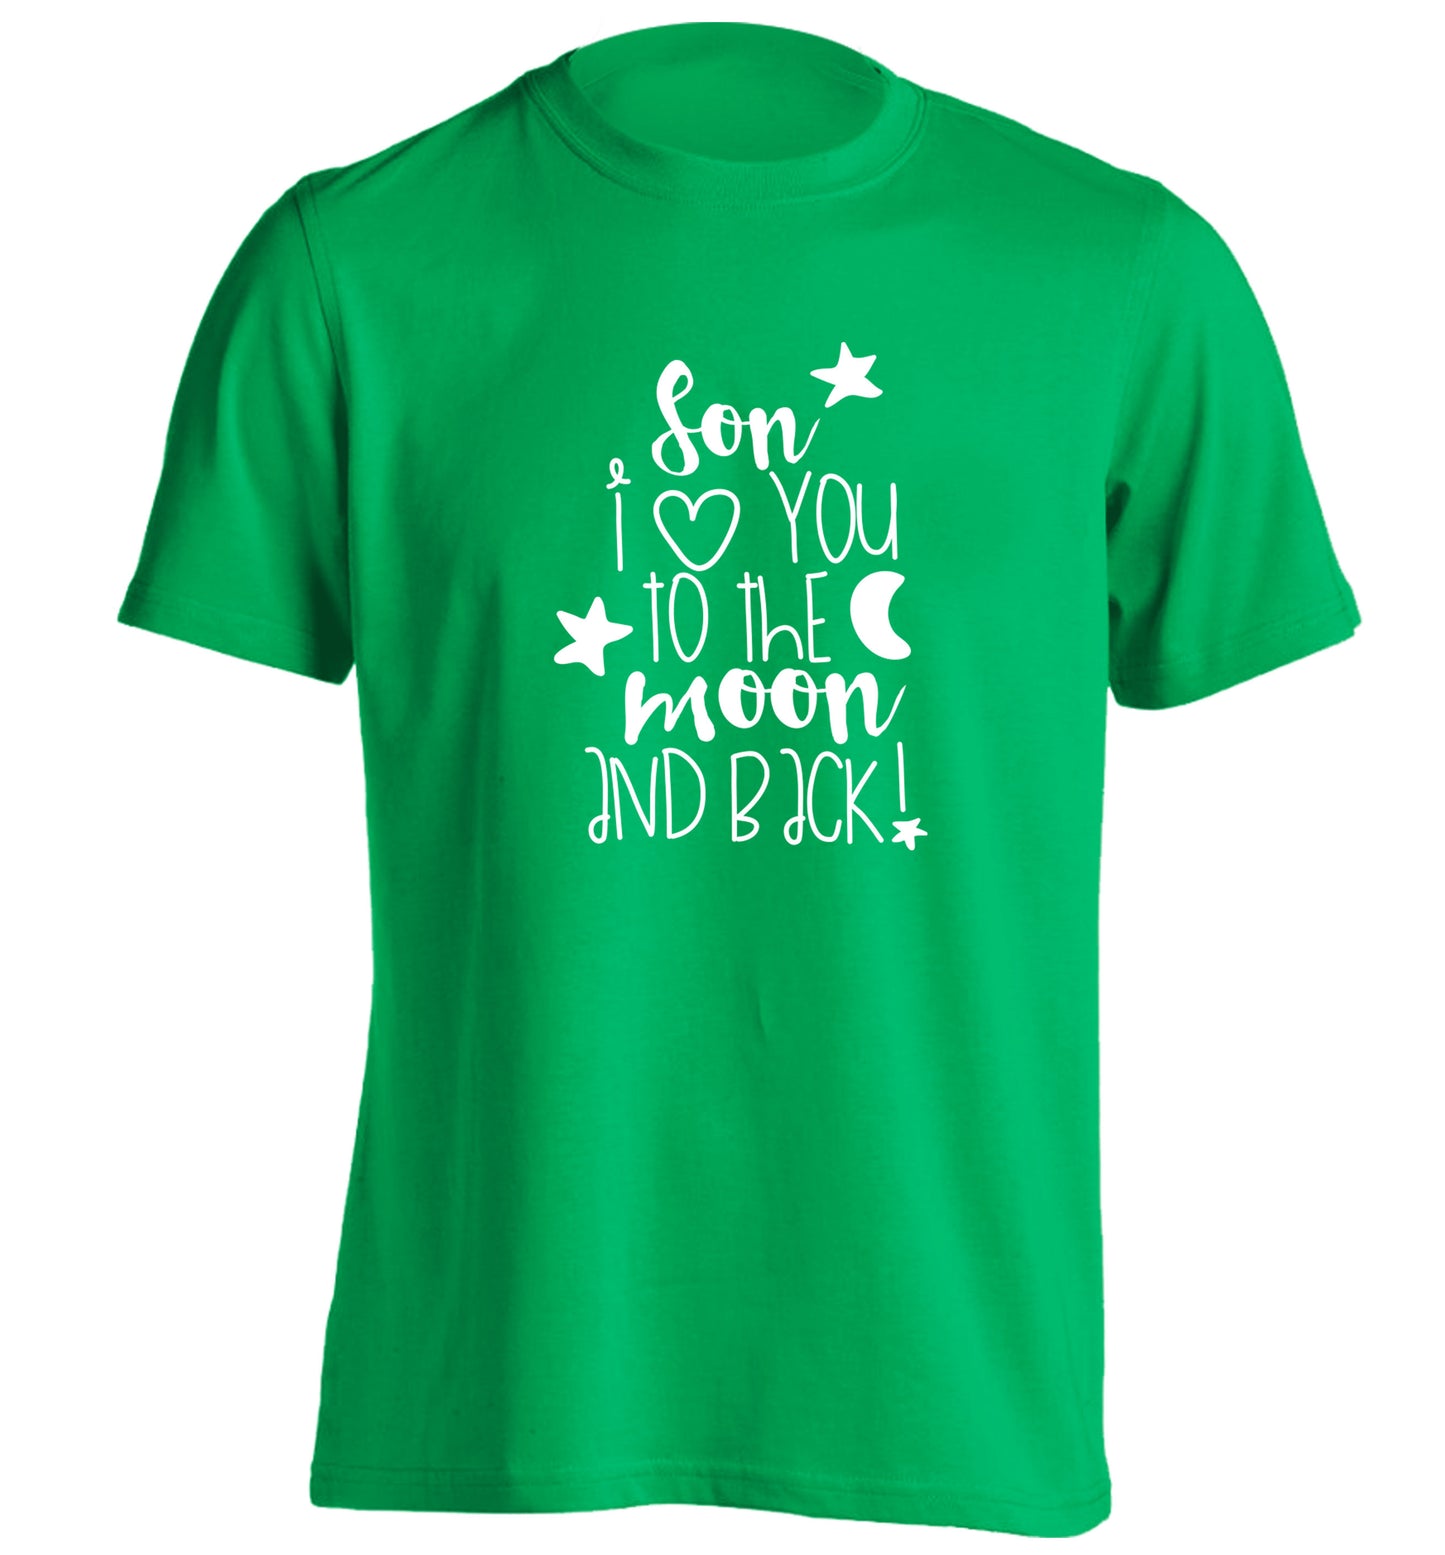 Son I love you to the moon and back adults unisex green Tshirt 2XL